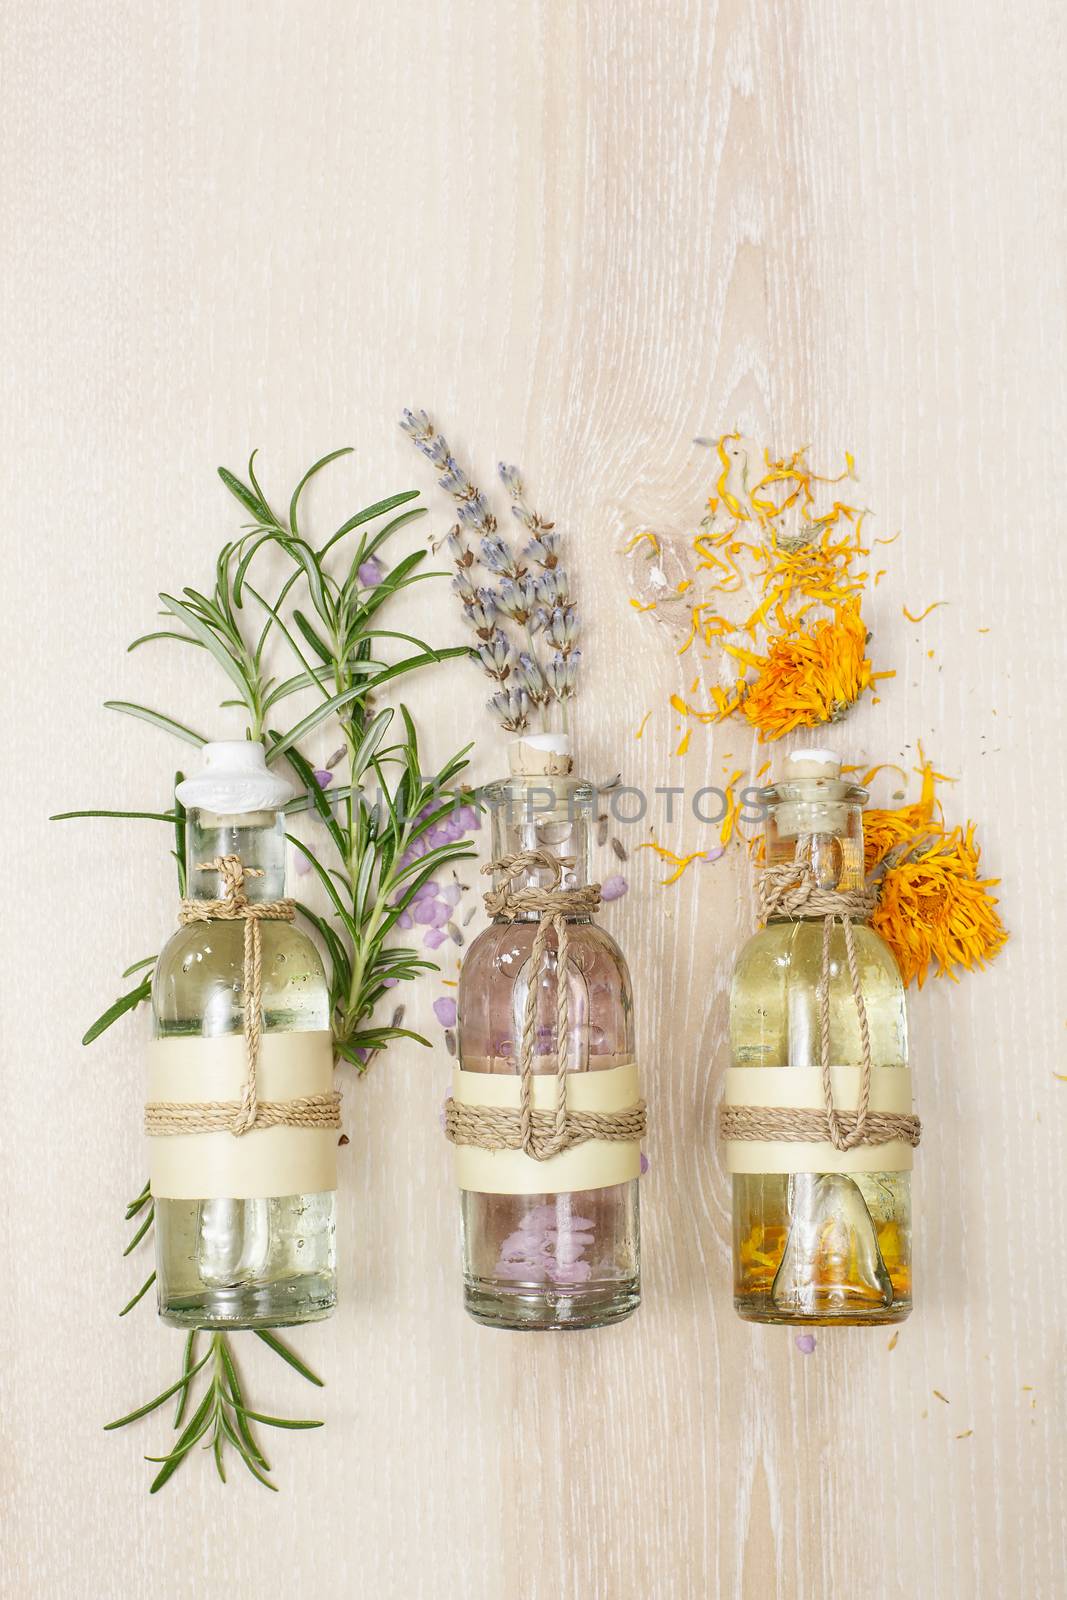 Row of essential oils in glass bottles, rosemary, lavender and calendula, on the wooden board.